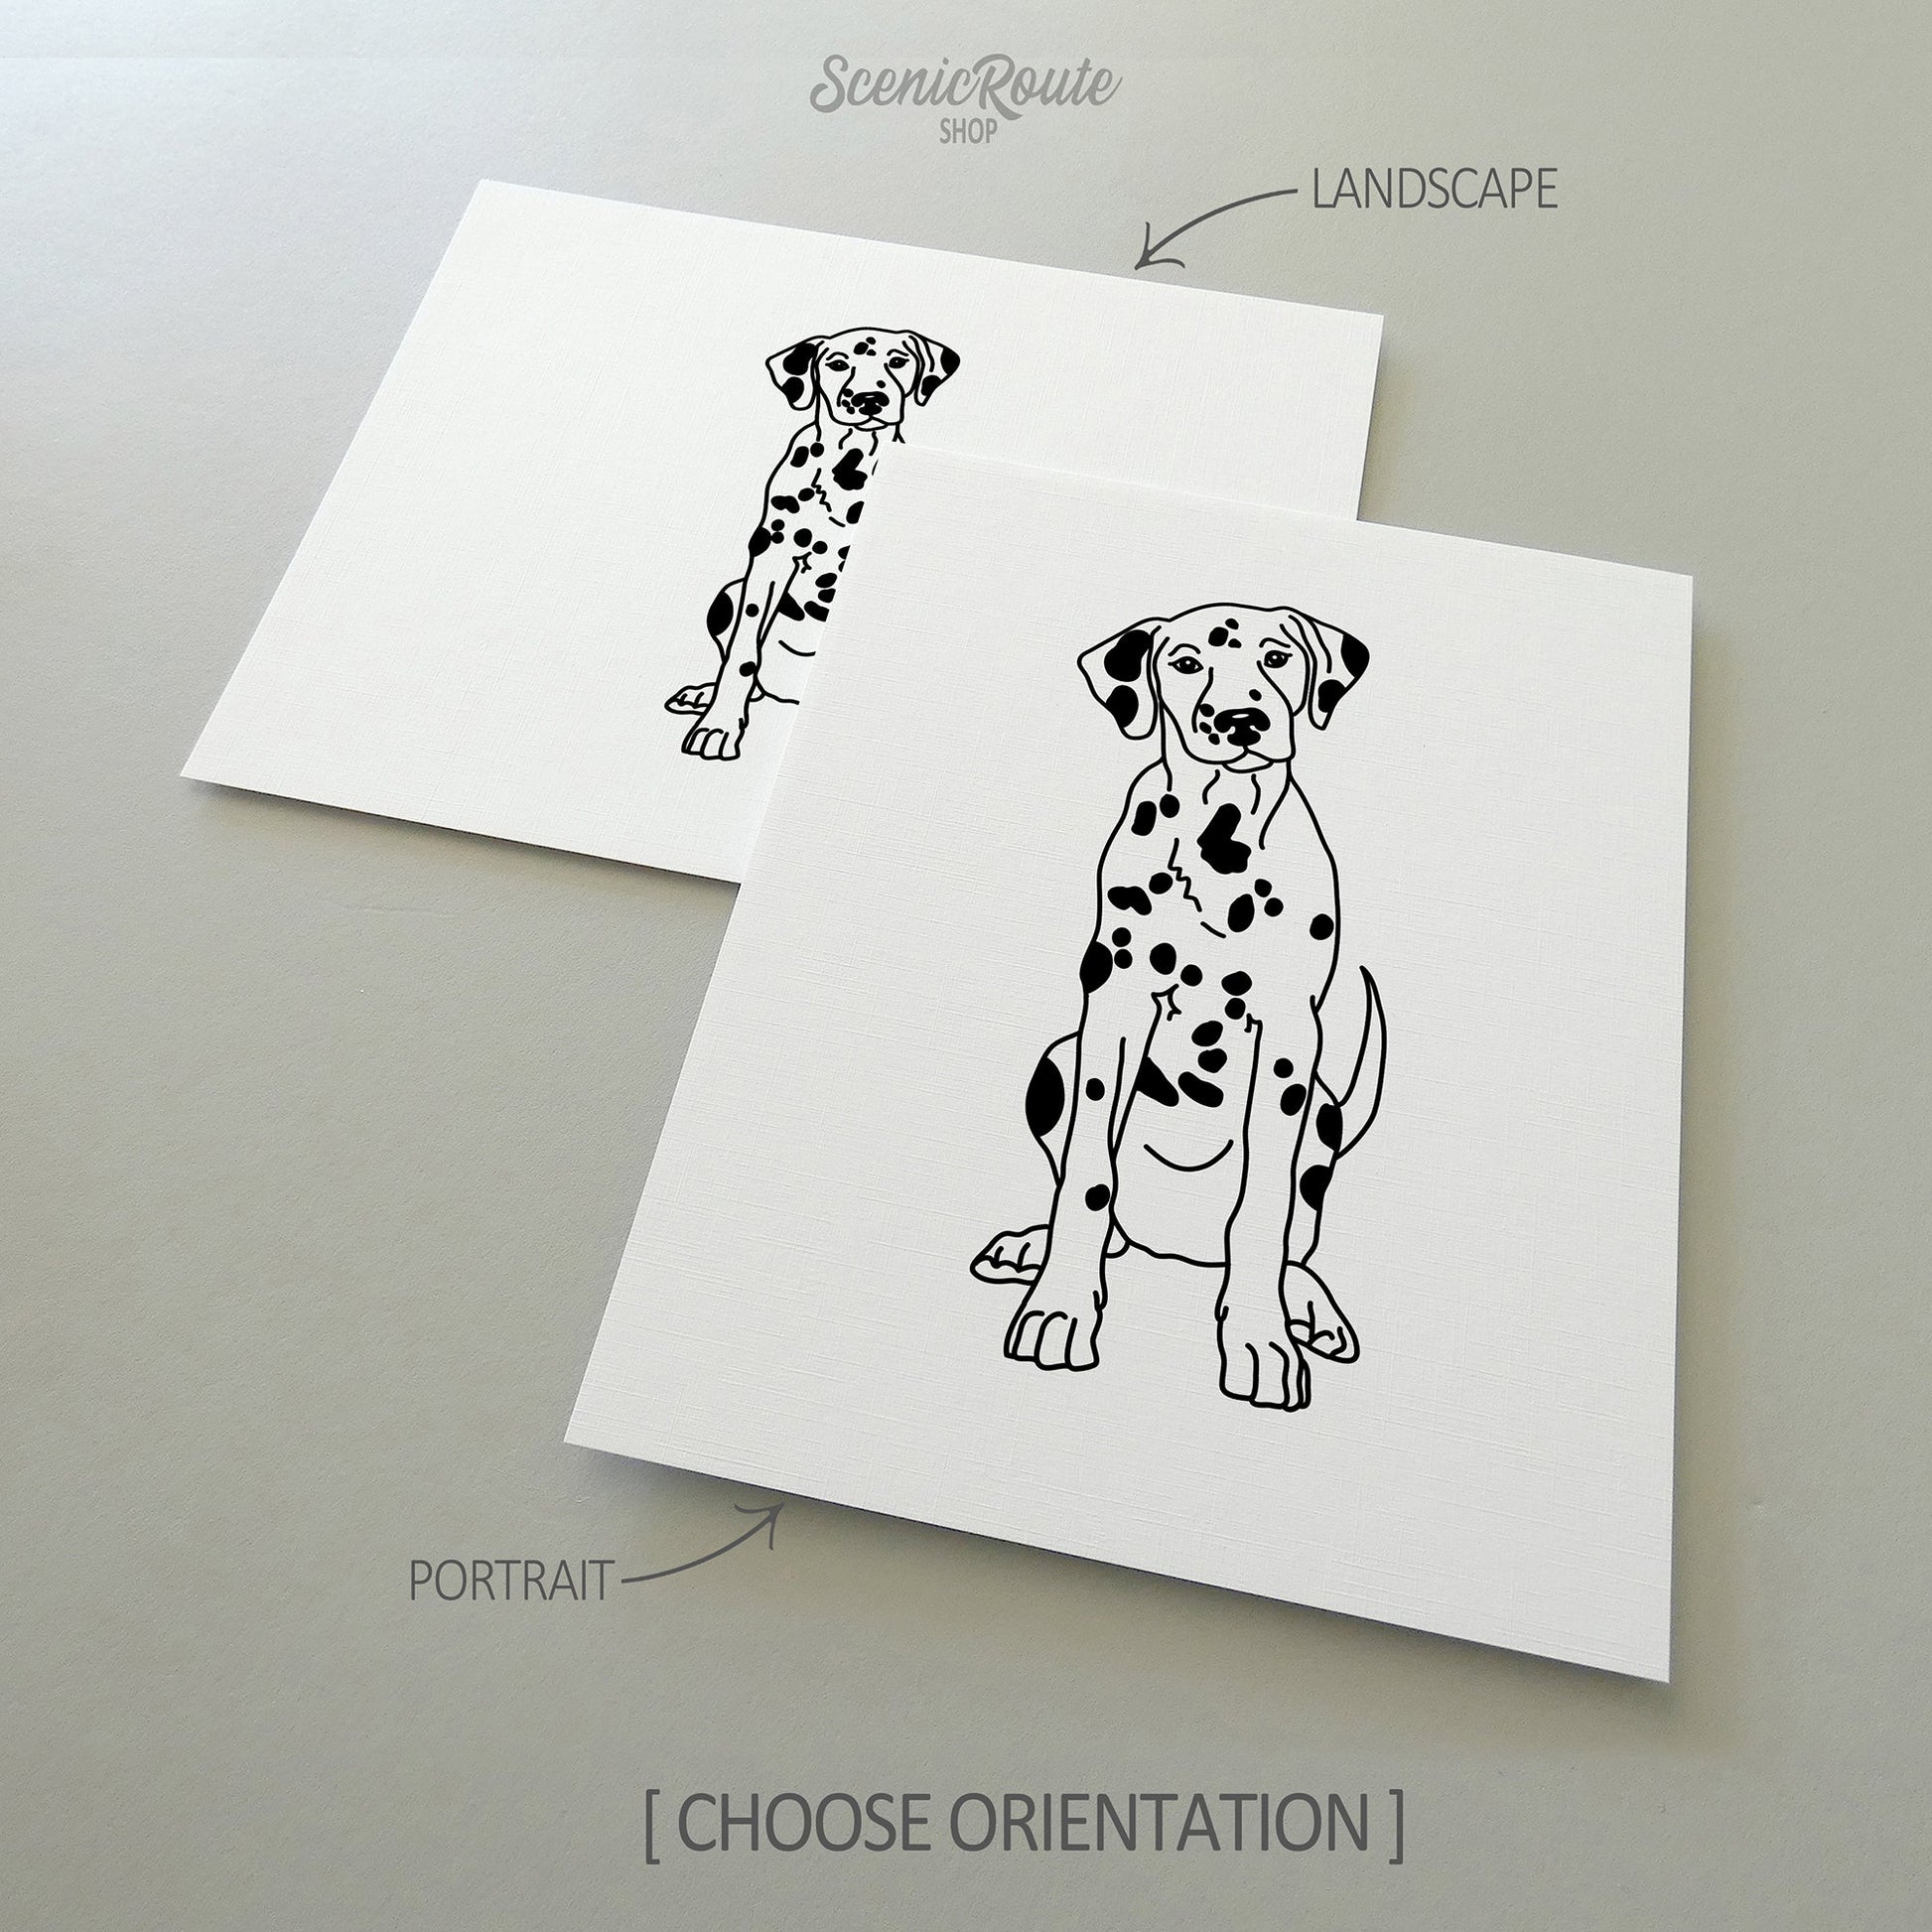 Two drawings of a Dalmatian dog on white linen paper with a gray background.  Pieces are shown in portrait and landscape orientation options to illustrate the available art print options.